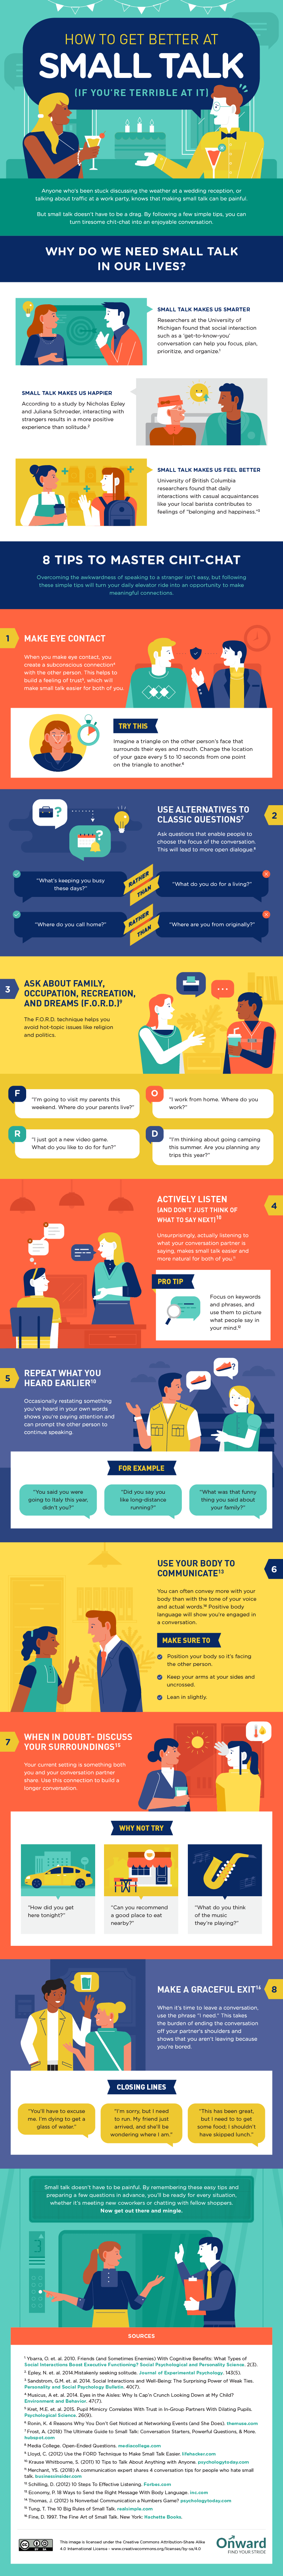 small talk infographic